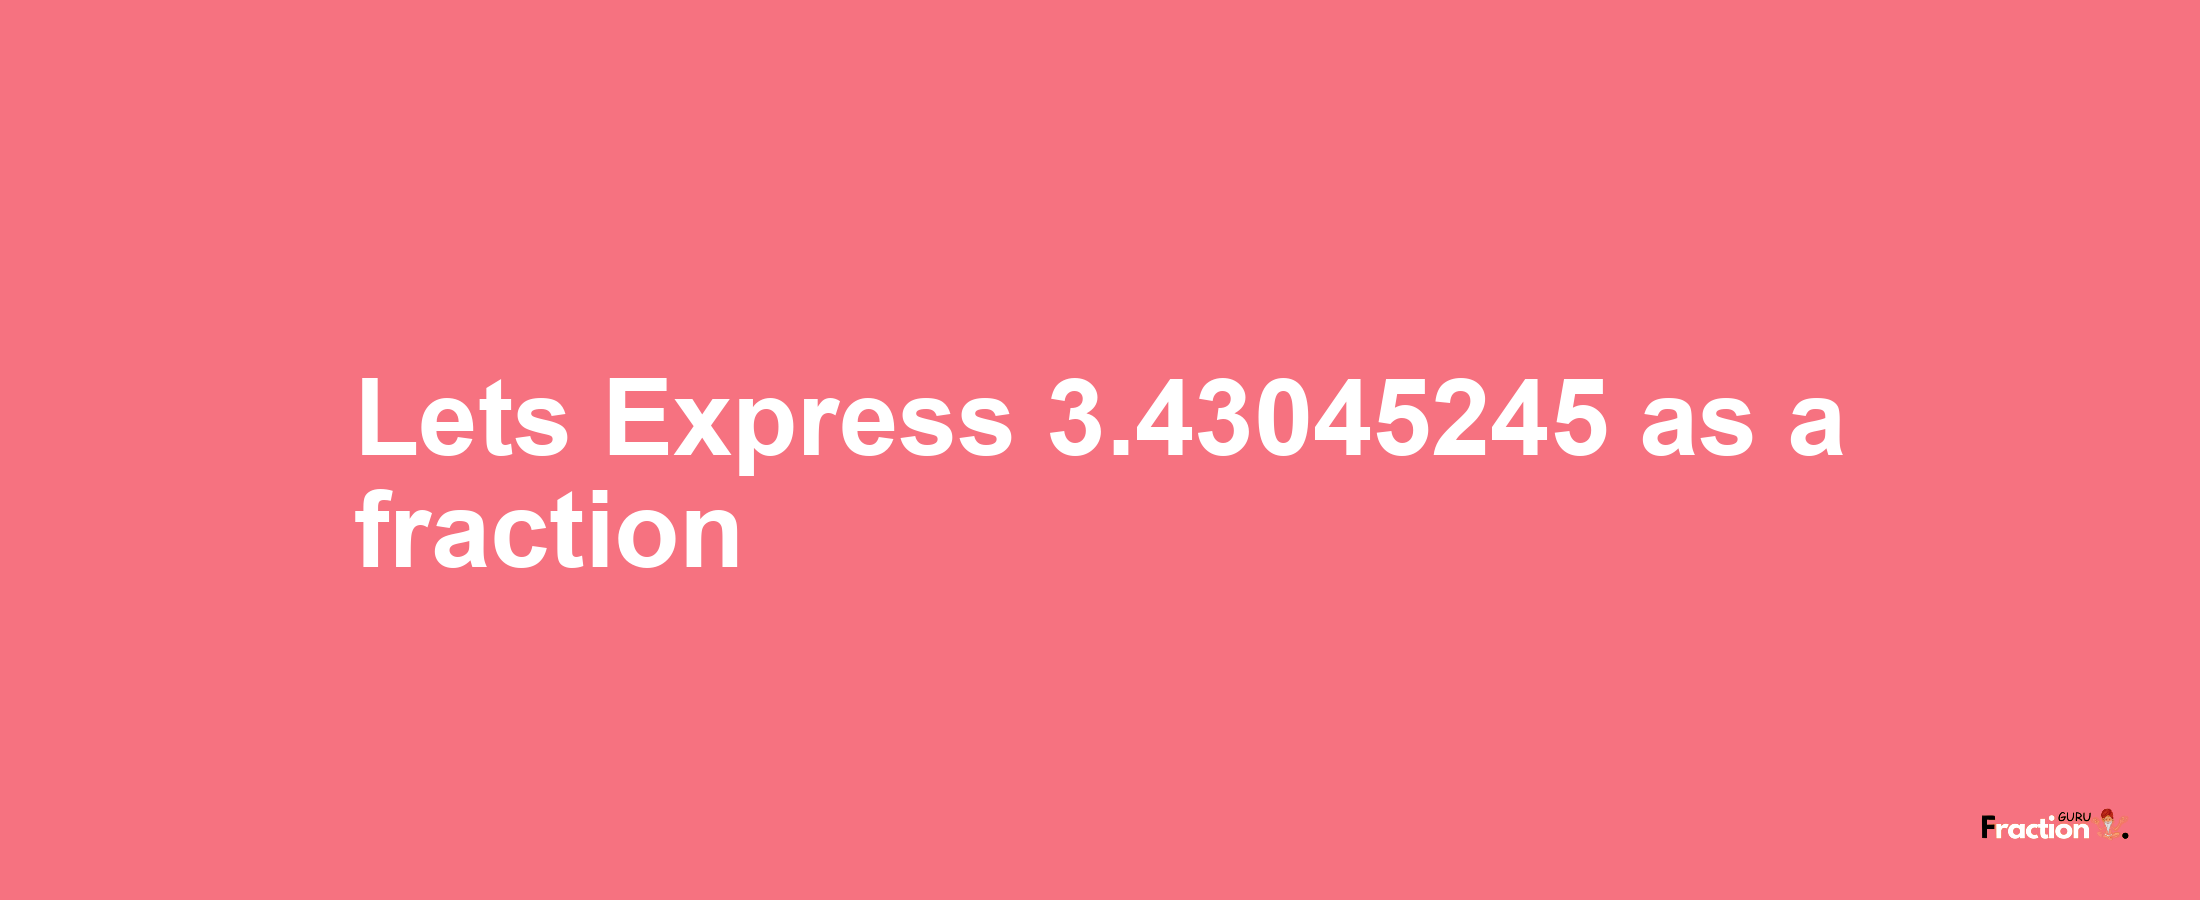 Lets Express 3.43045245 as afraction